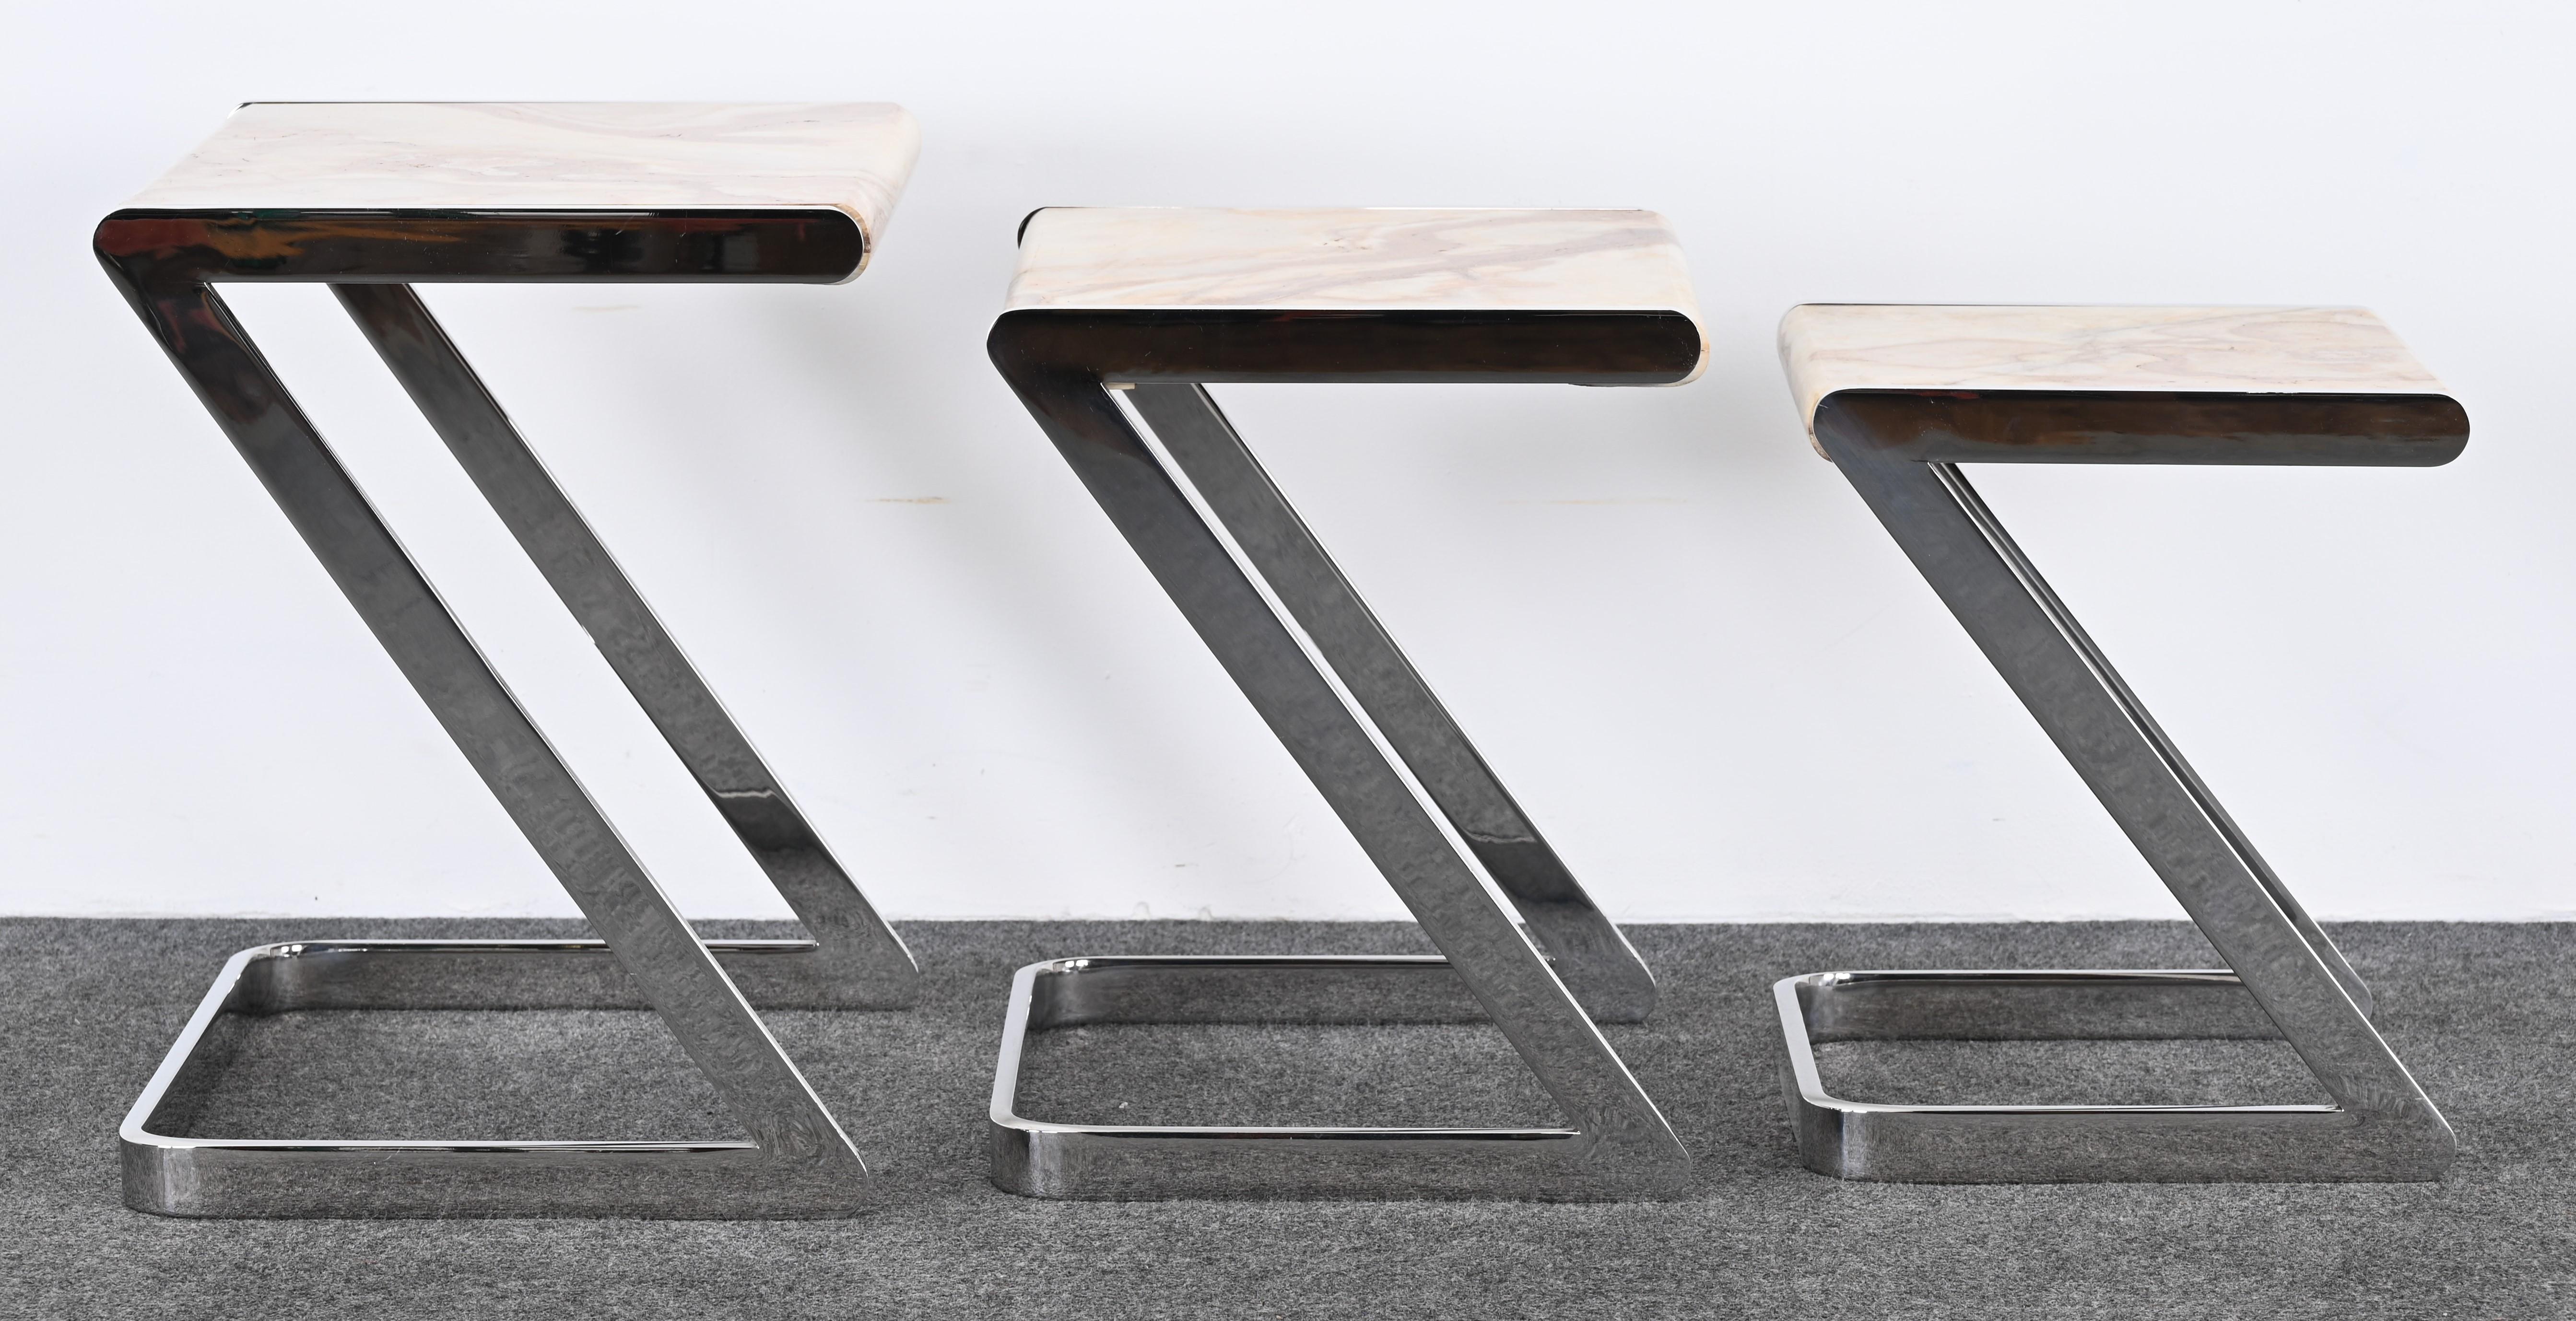 American Onyx and Stainless Steel Nesting Tables by Brueton, 1980s For Sale